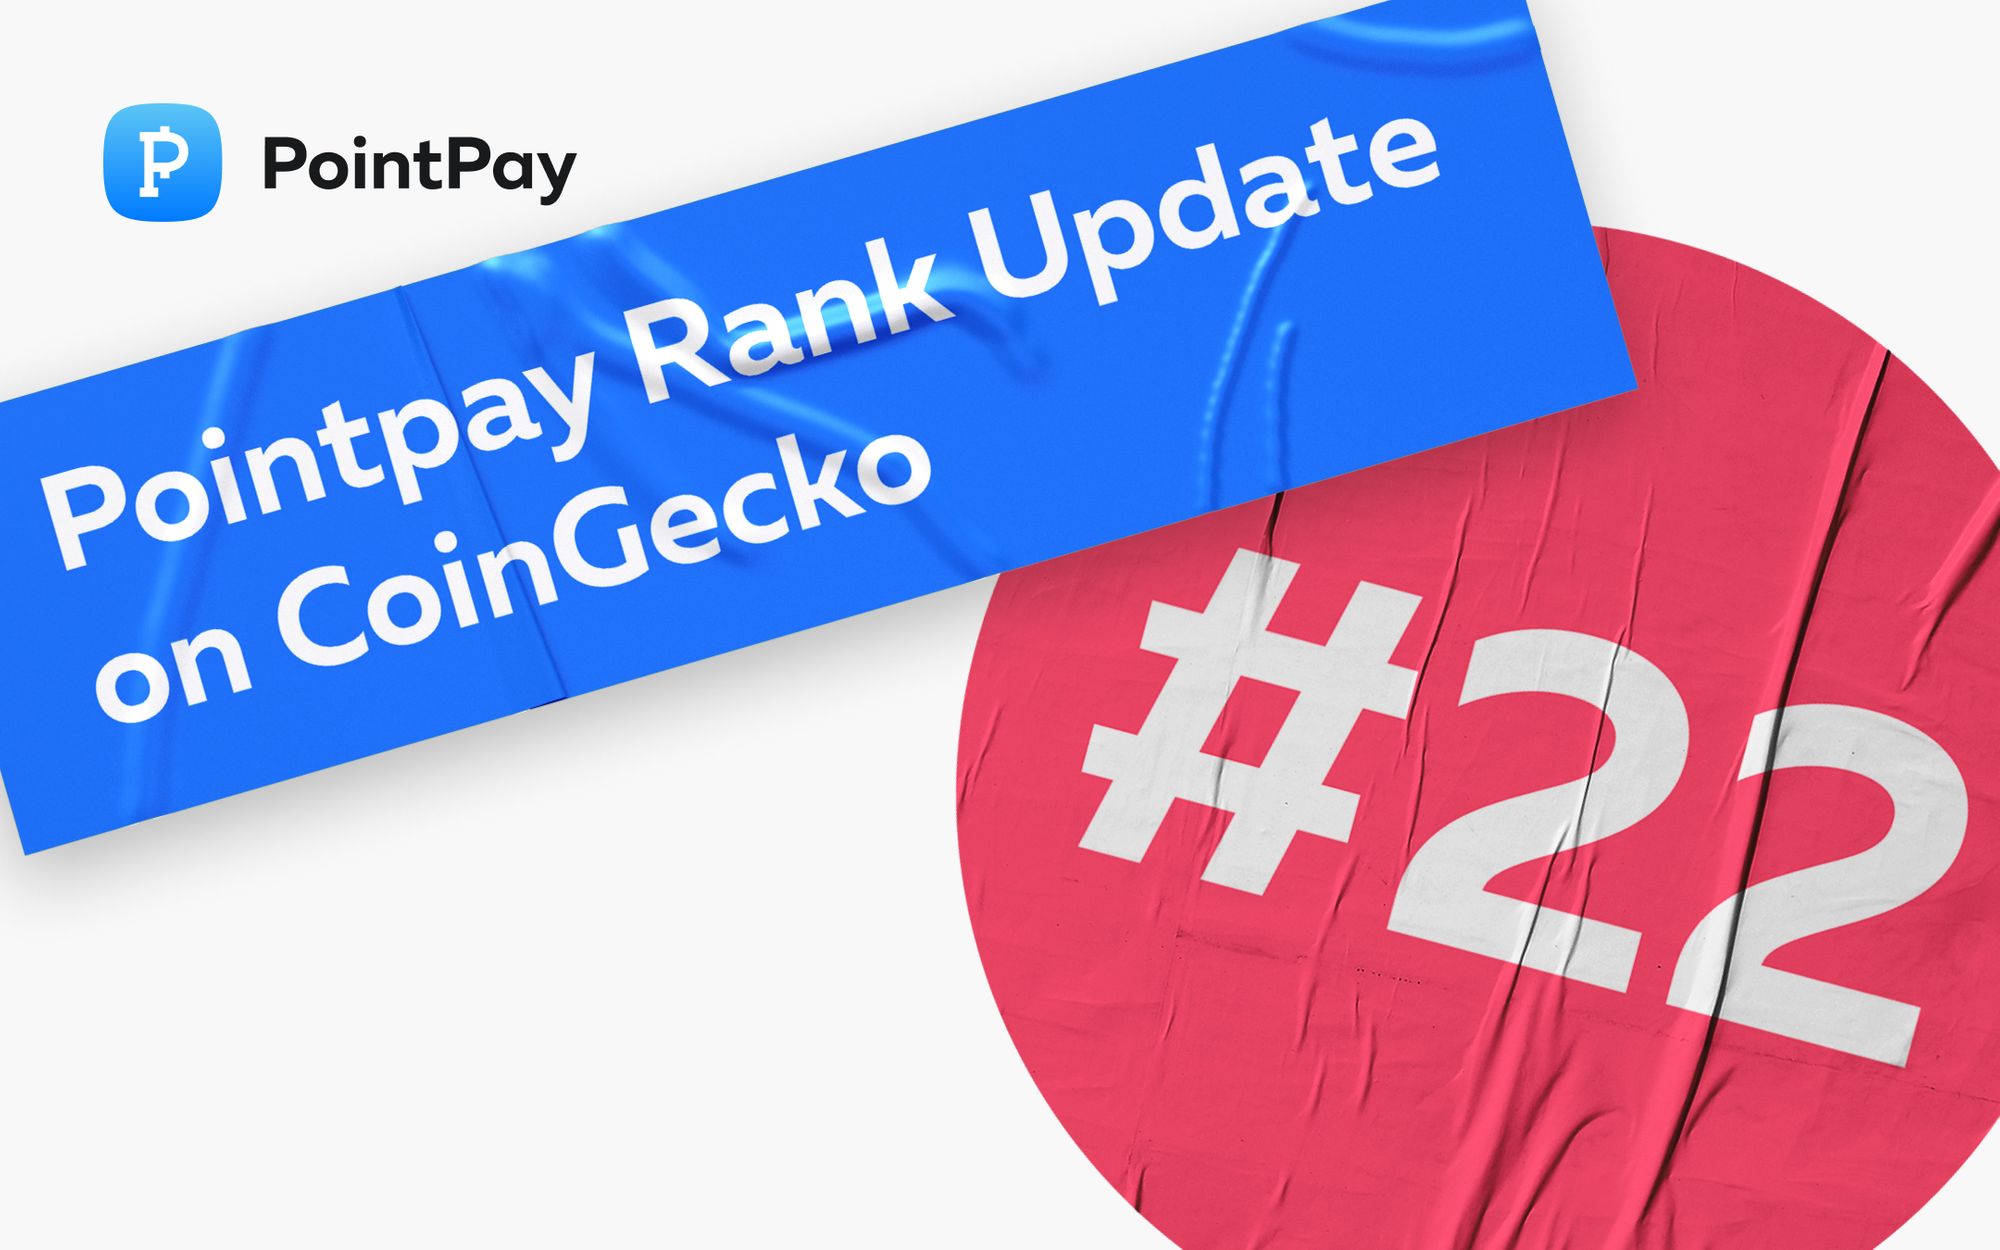 PointPay Soars to 22nd Position on CoinGecko, Cementing Its Status as a Premier Worldwide Spot Exchange!